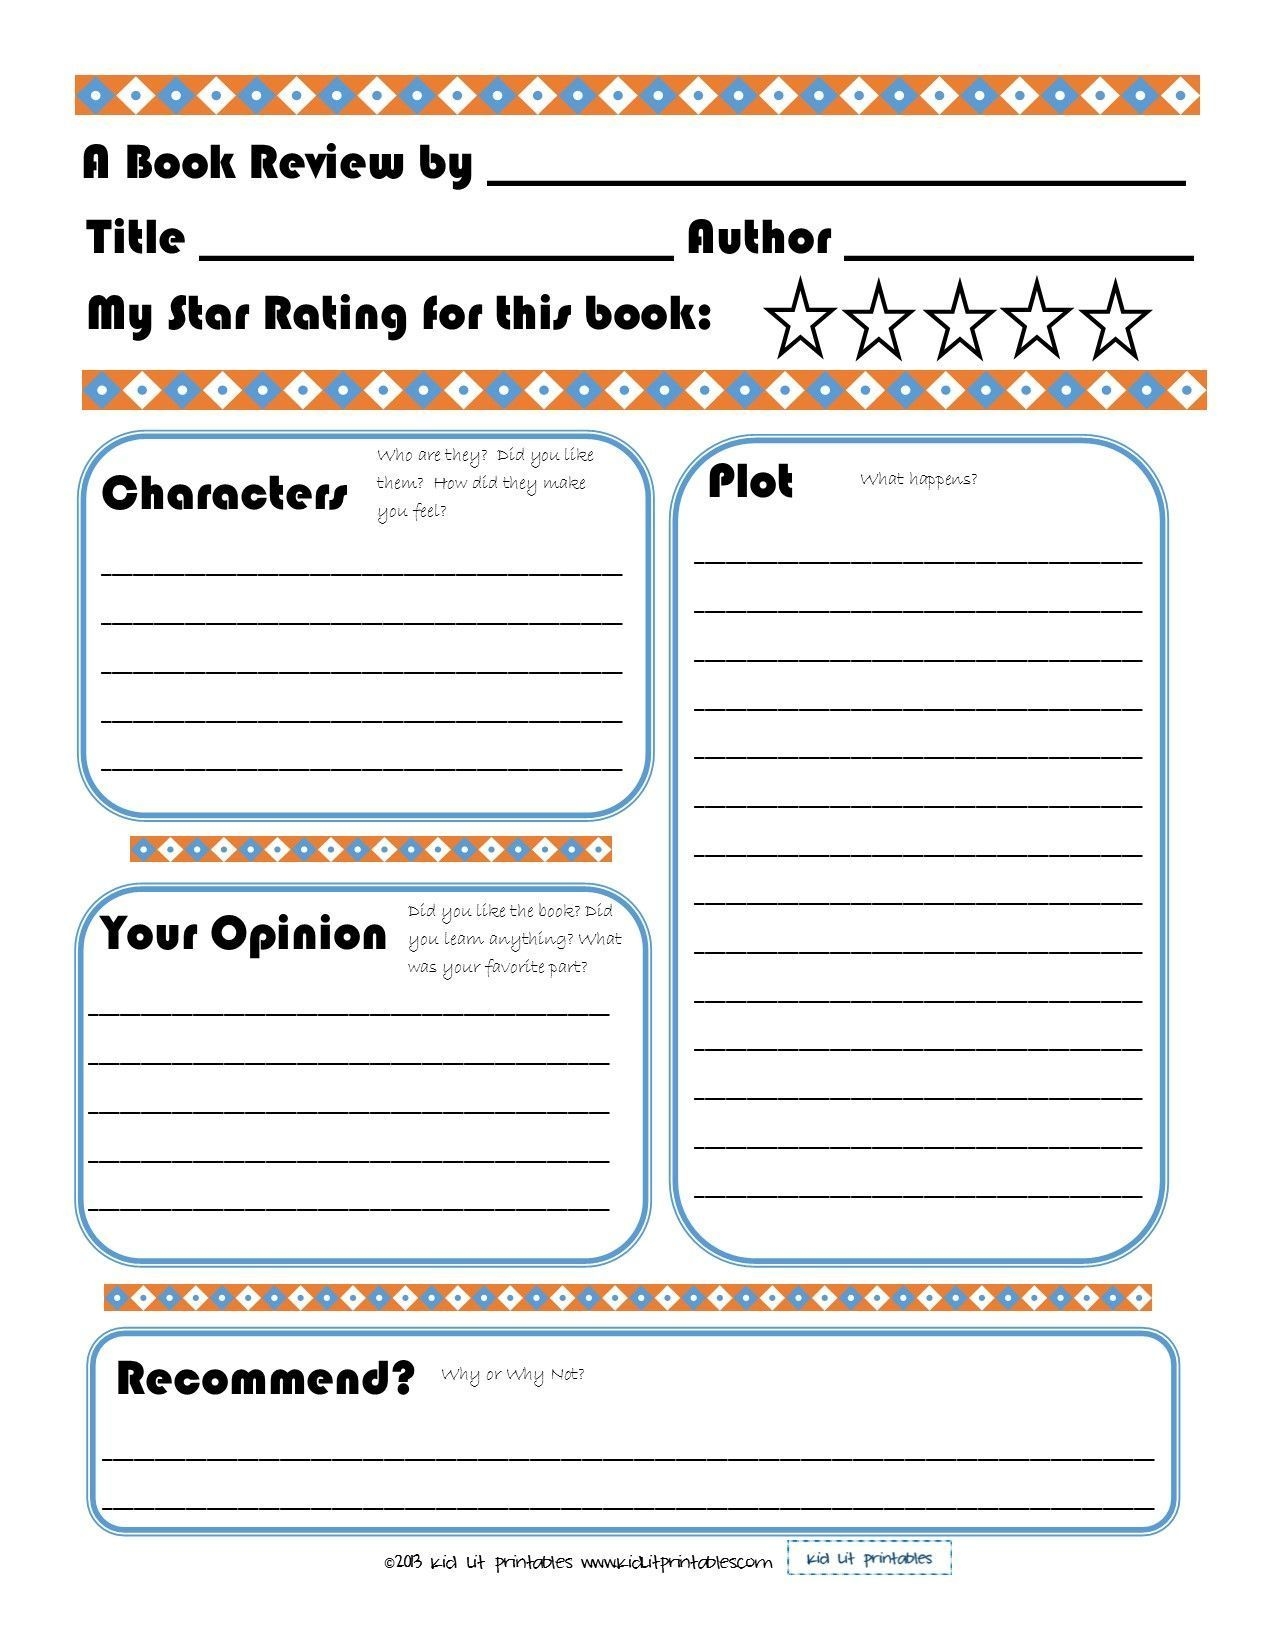 The Astonishing Free Printable Book Report Forms Book Reviews For Kids With Re Book Reviews For Kids Book Report Templates Book Report Template Middle School